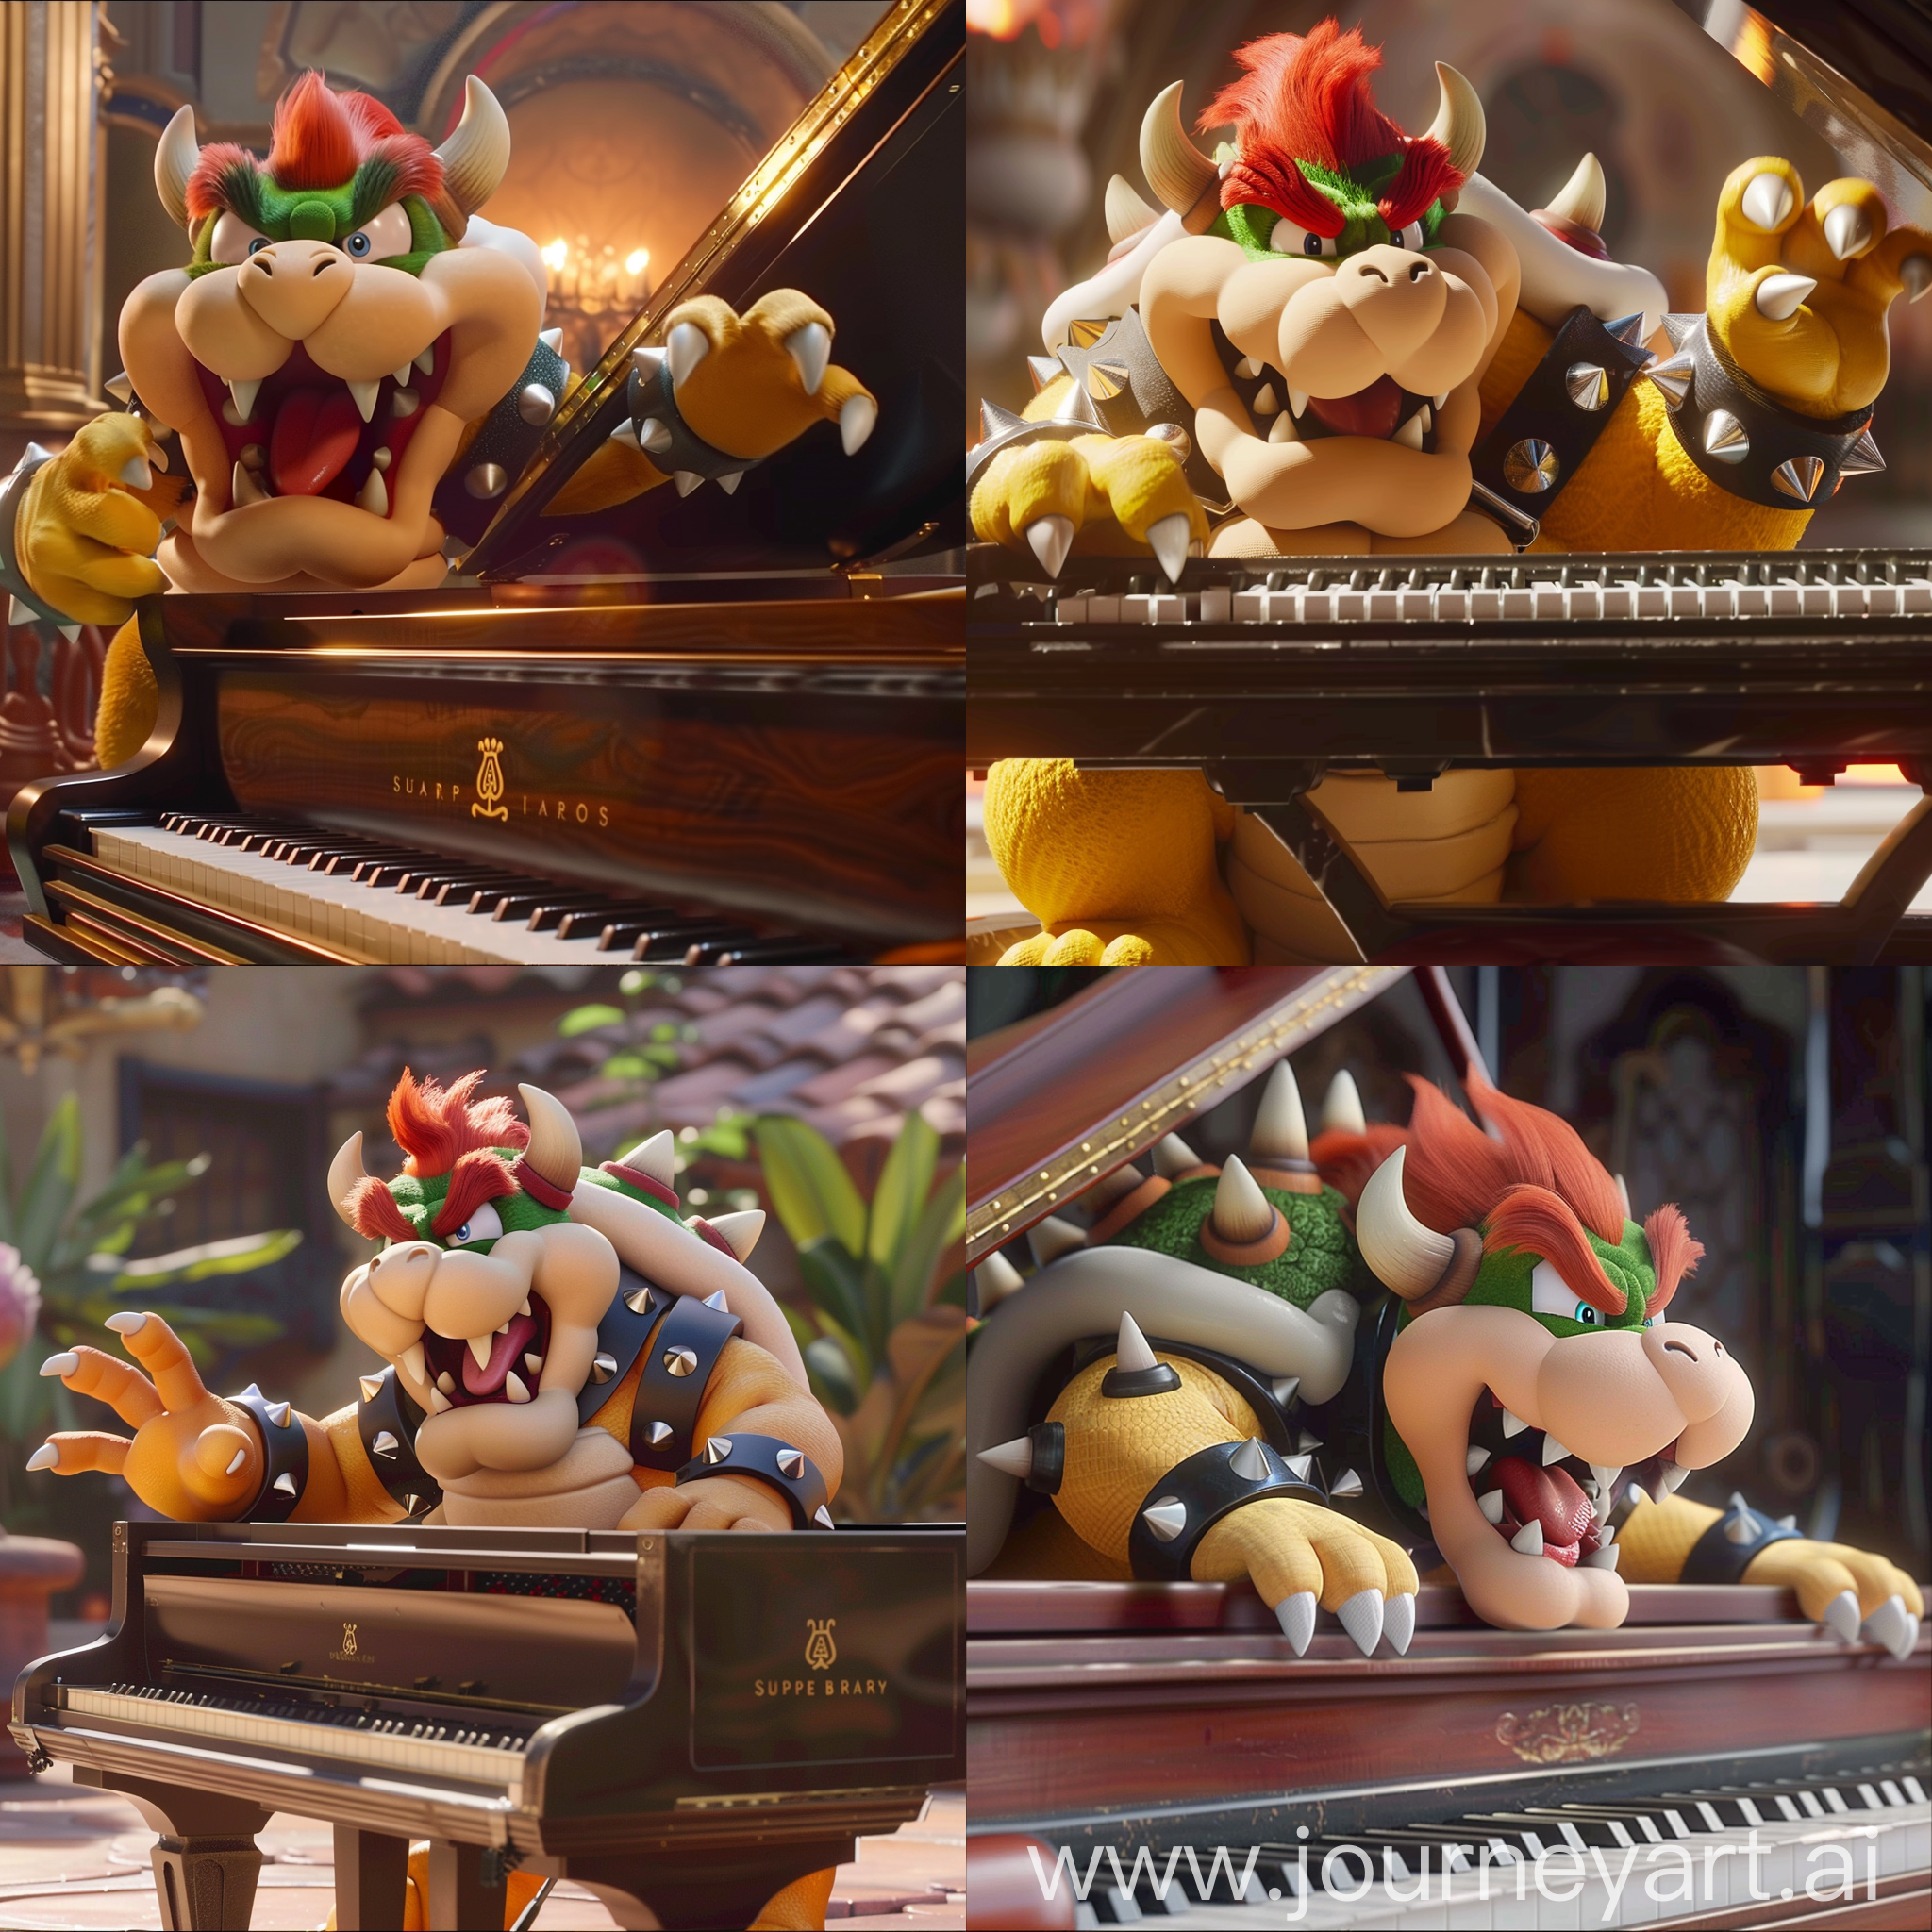 Bowser Play a Grand Piano And Sings Peaches,In Super Mario Bros. Movie,